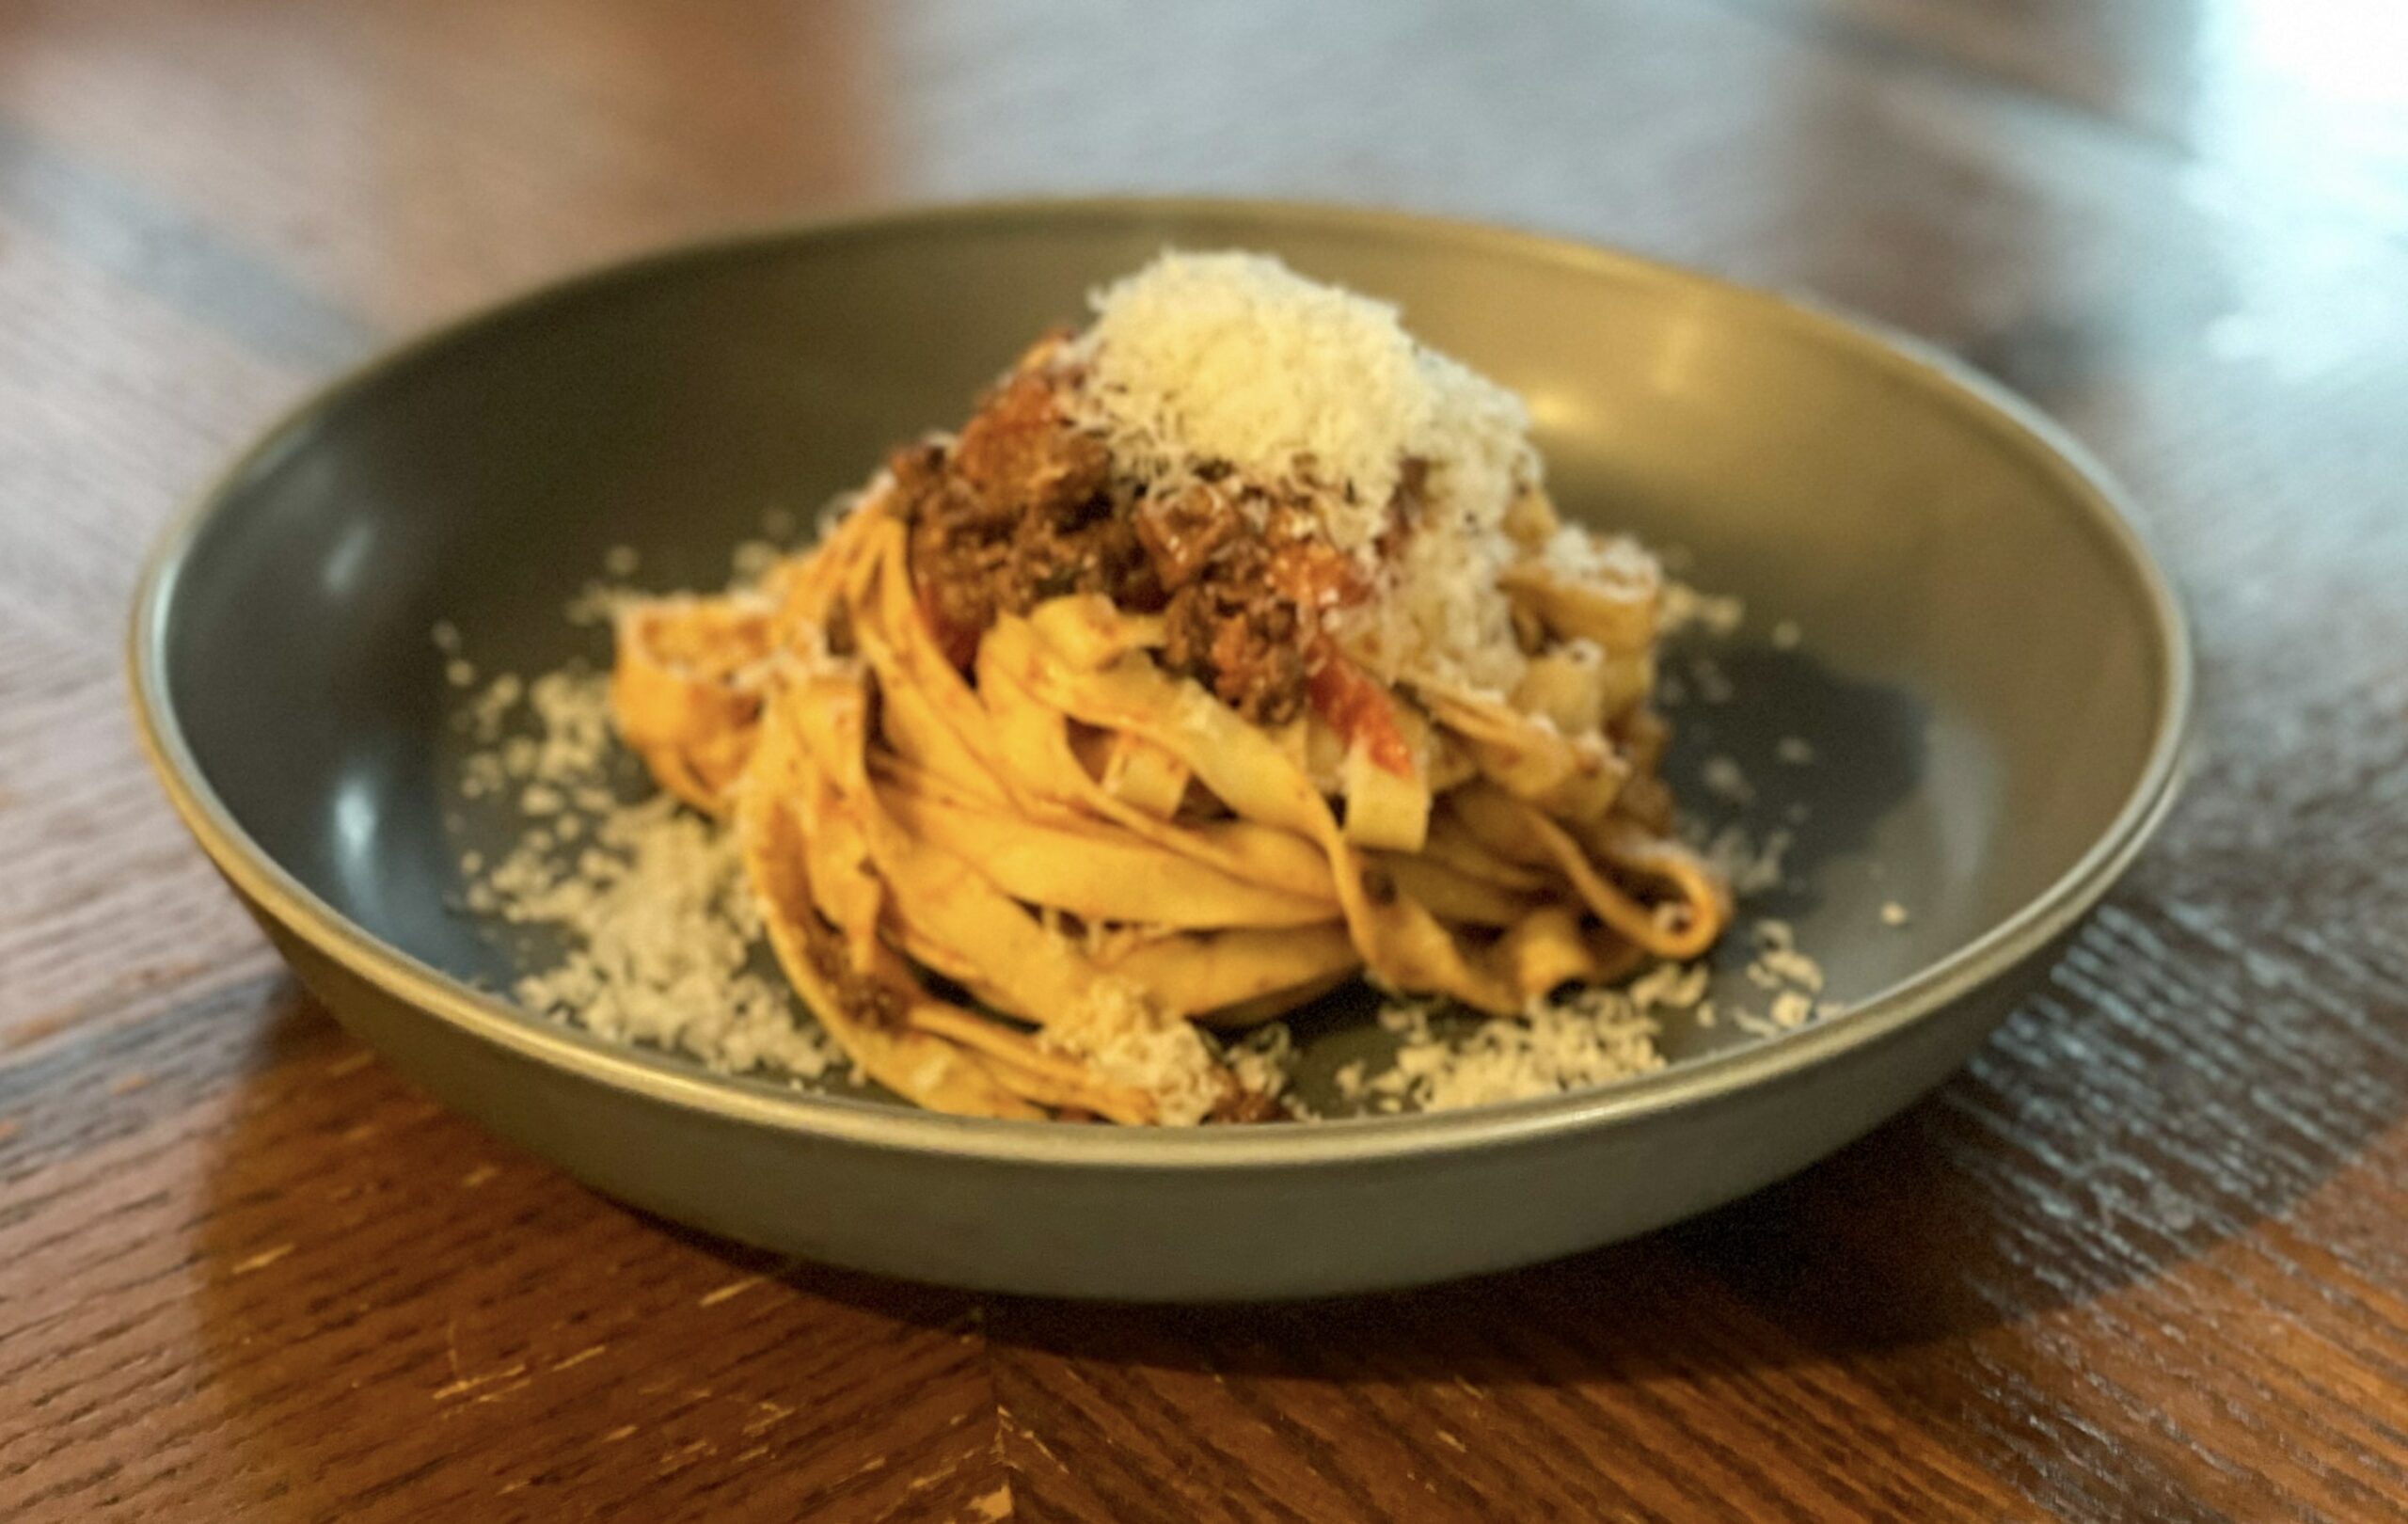 https://invitingeats.com/wp-content/uploads/2022/04/Inas-Weeknight-Bolognese-min-scaled.jpg